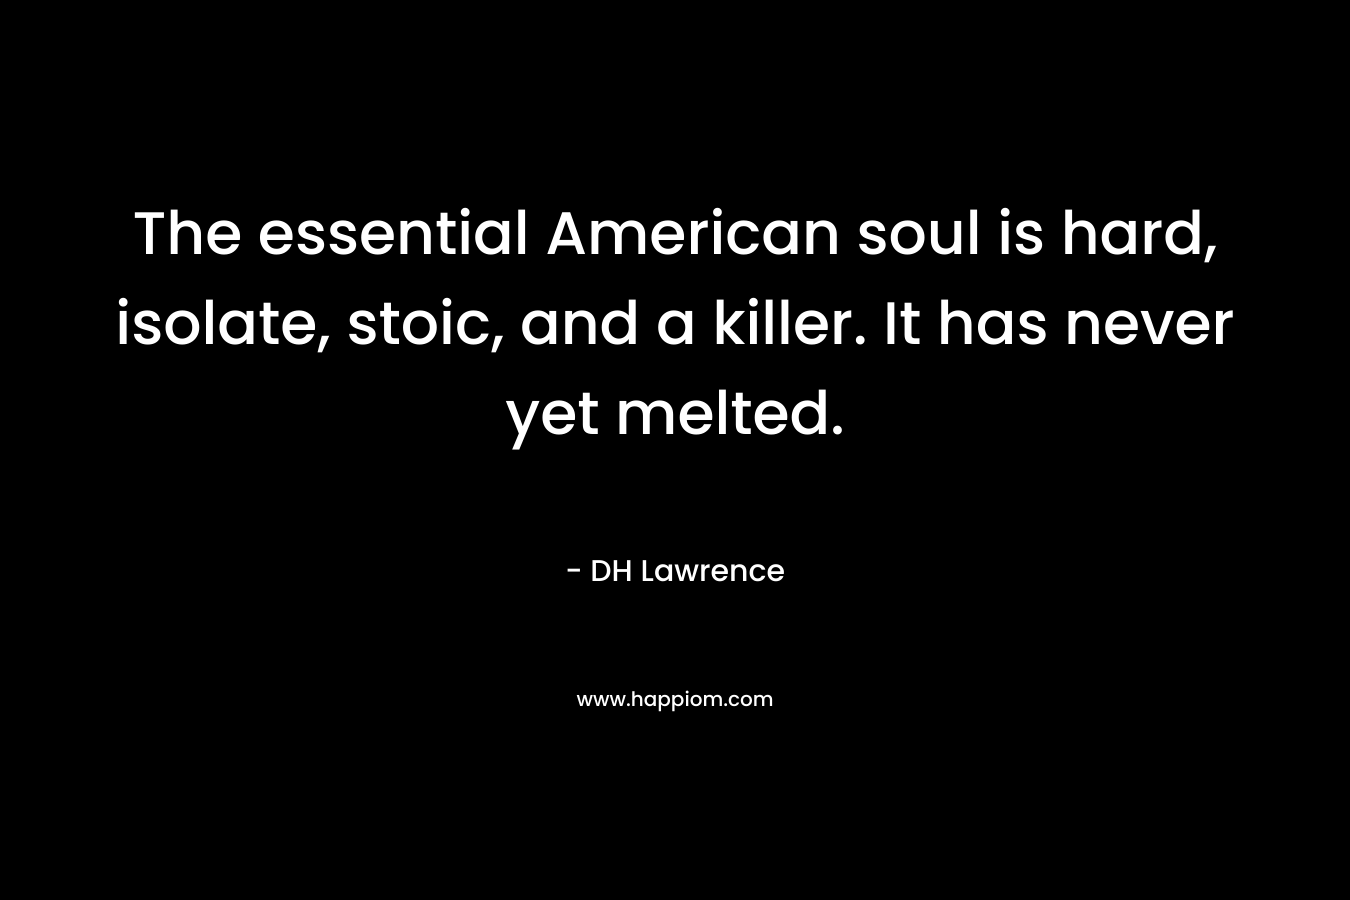 The essential American soul is hard, isolate, stoic, and a killer. It has never yet melted. – DH Lawrence